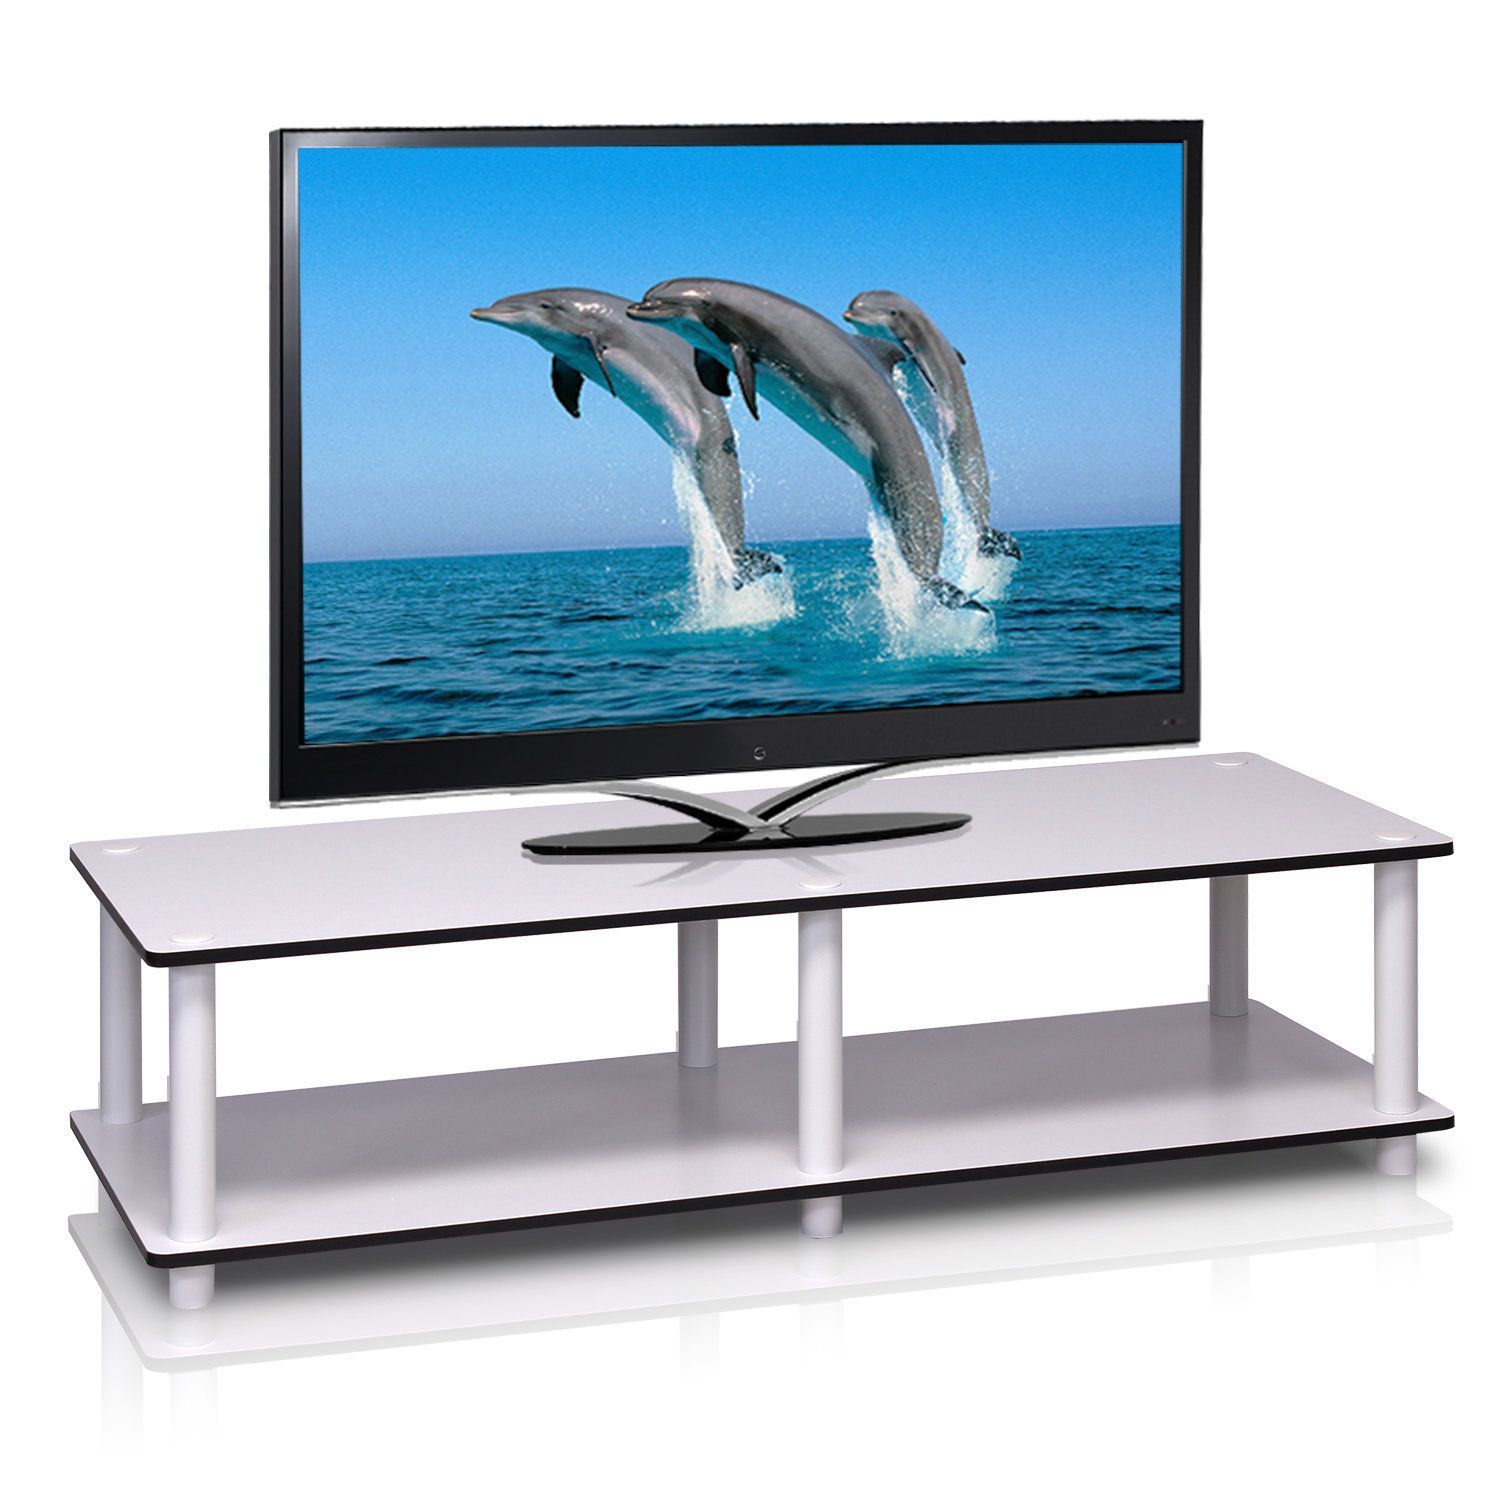 Addyson Media Console | Furinno, Tv Stand, Home With Furinno 2 Tier Elevated Tv Stands (View 11 of 15)